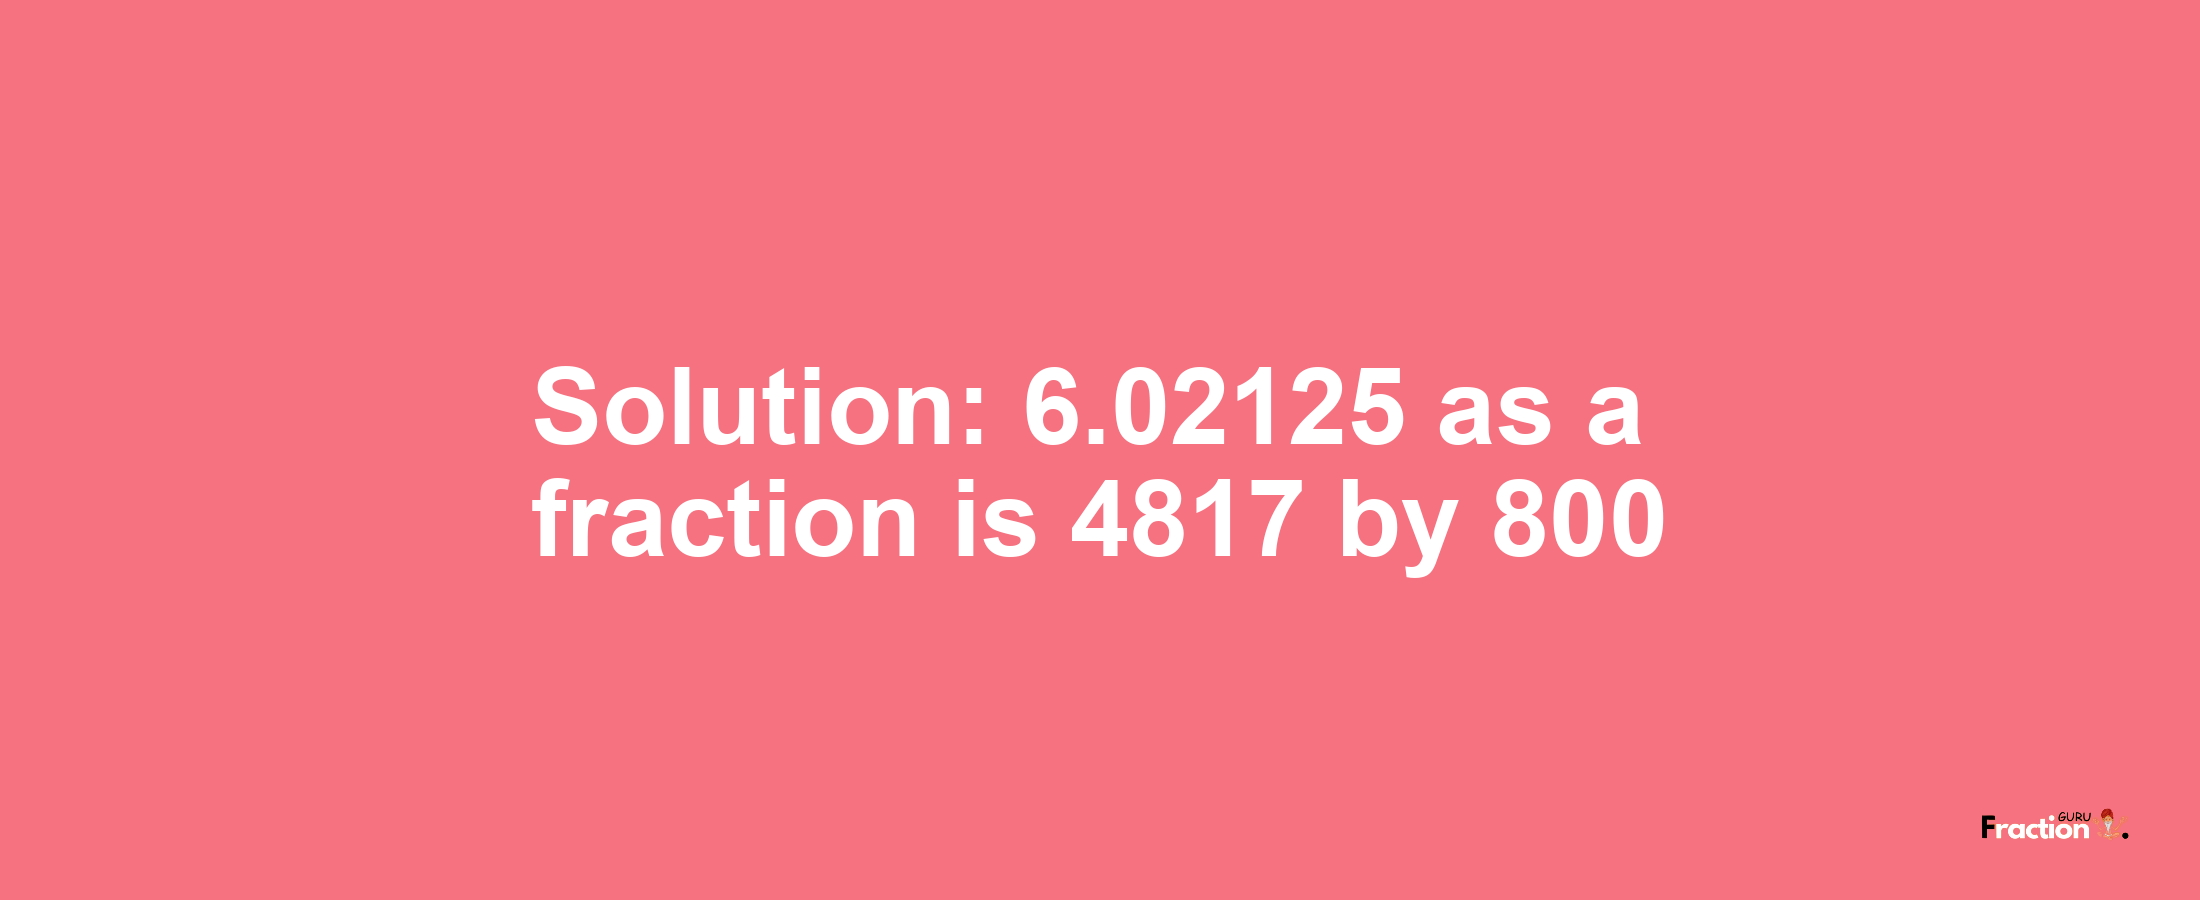 Solution:6.02125 as a fraction is 4817/800